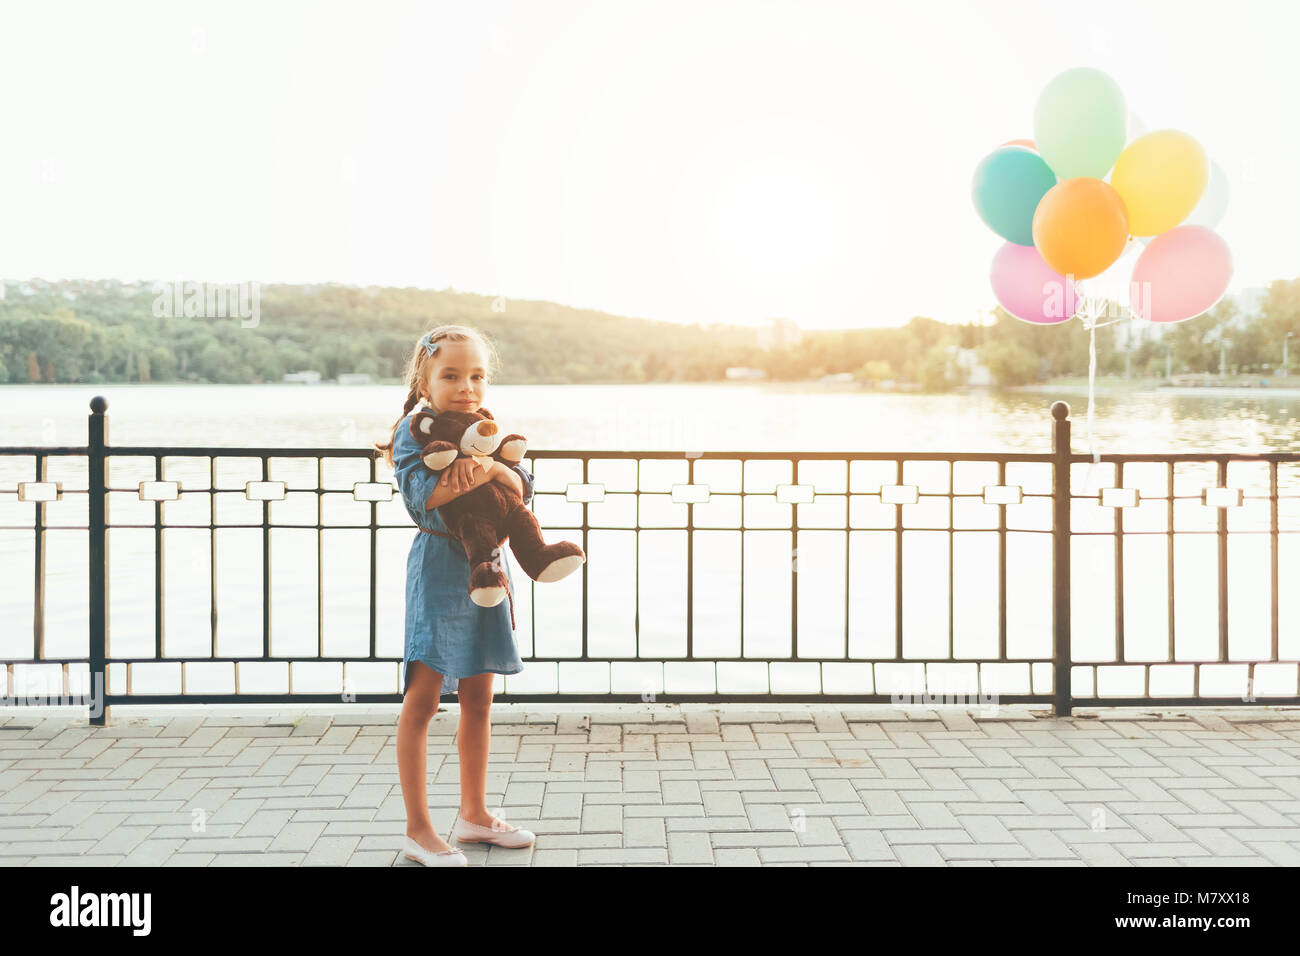 Full length portrait of girl hugging a cute teddy bear looking to camera on a lake with trees and balloons background wearing denim dress. Kids friend Stock Photo